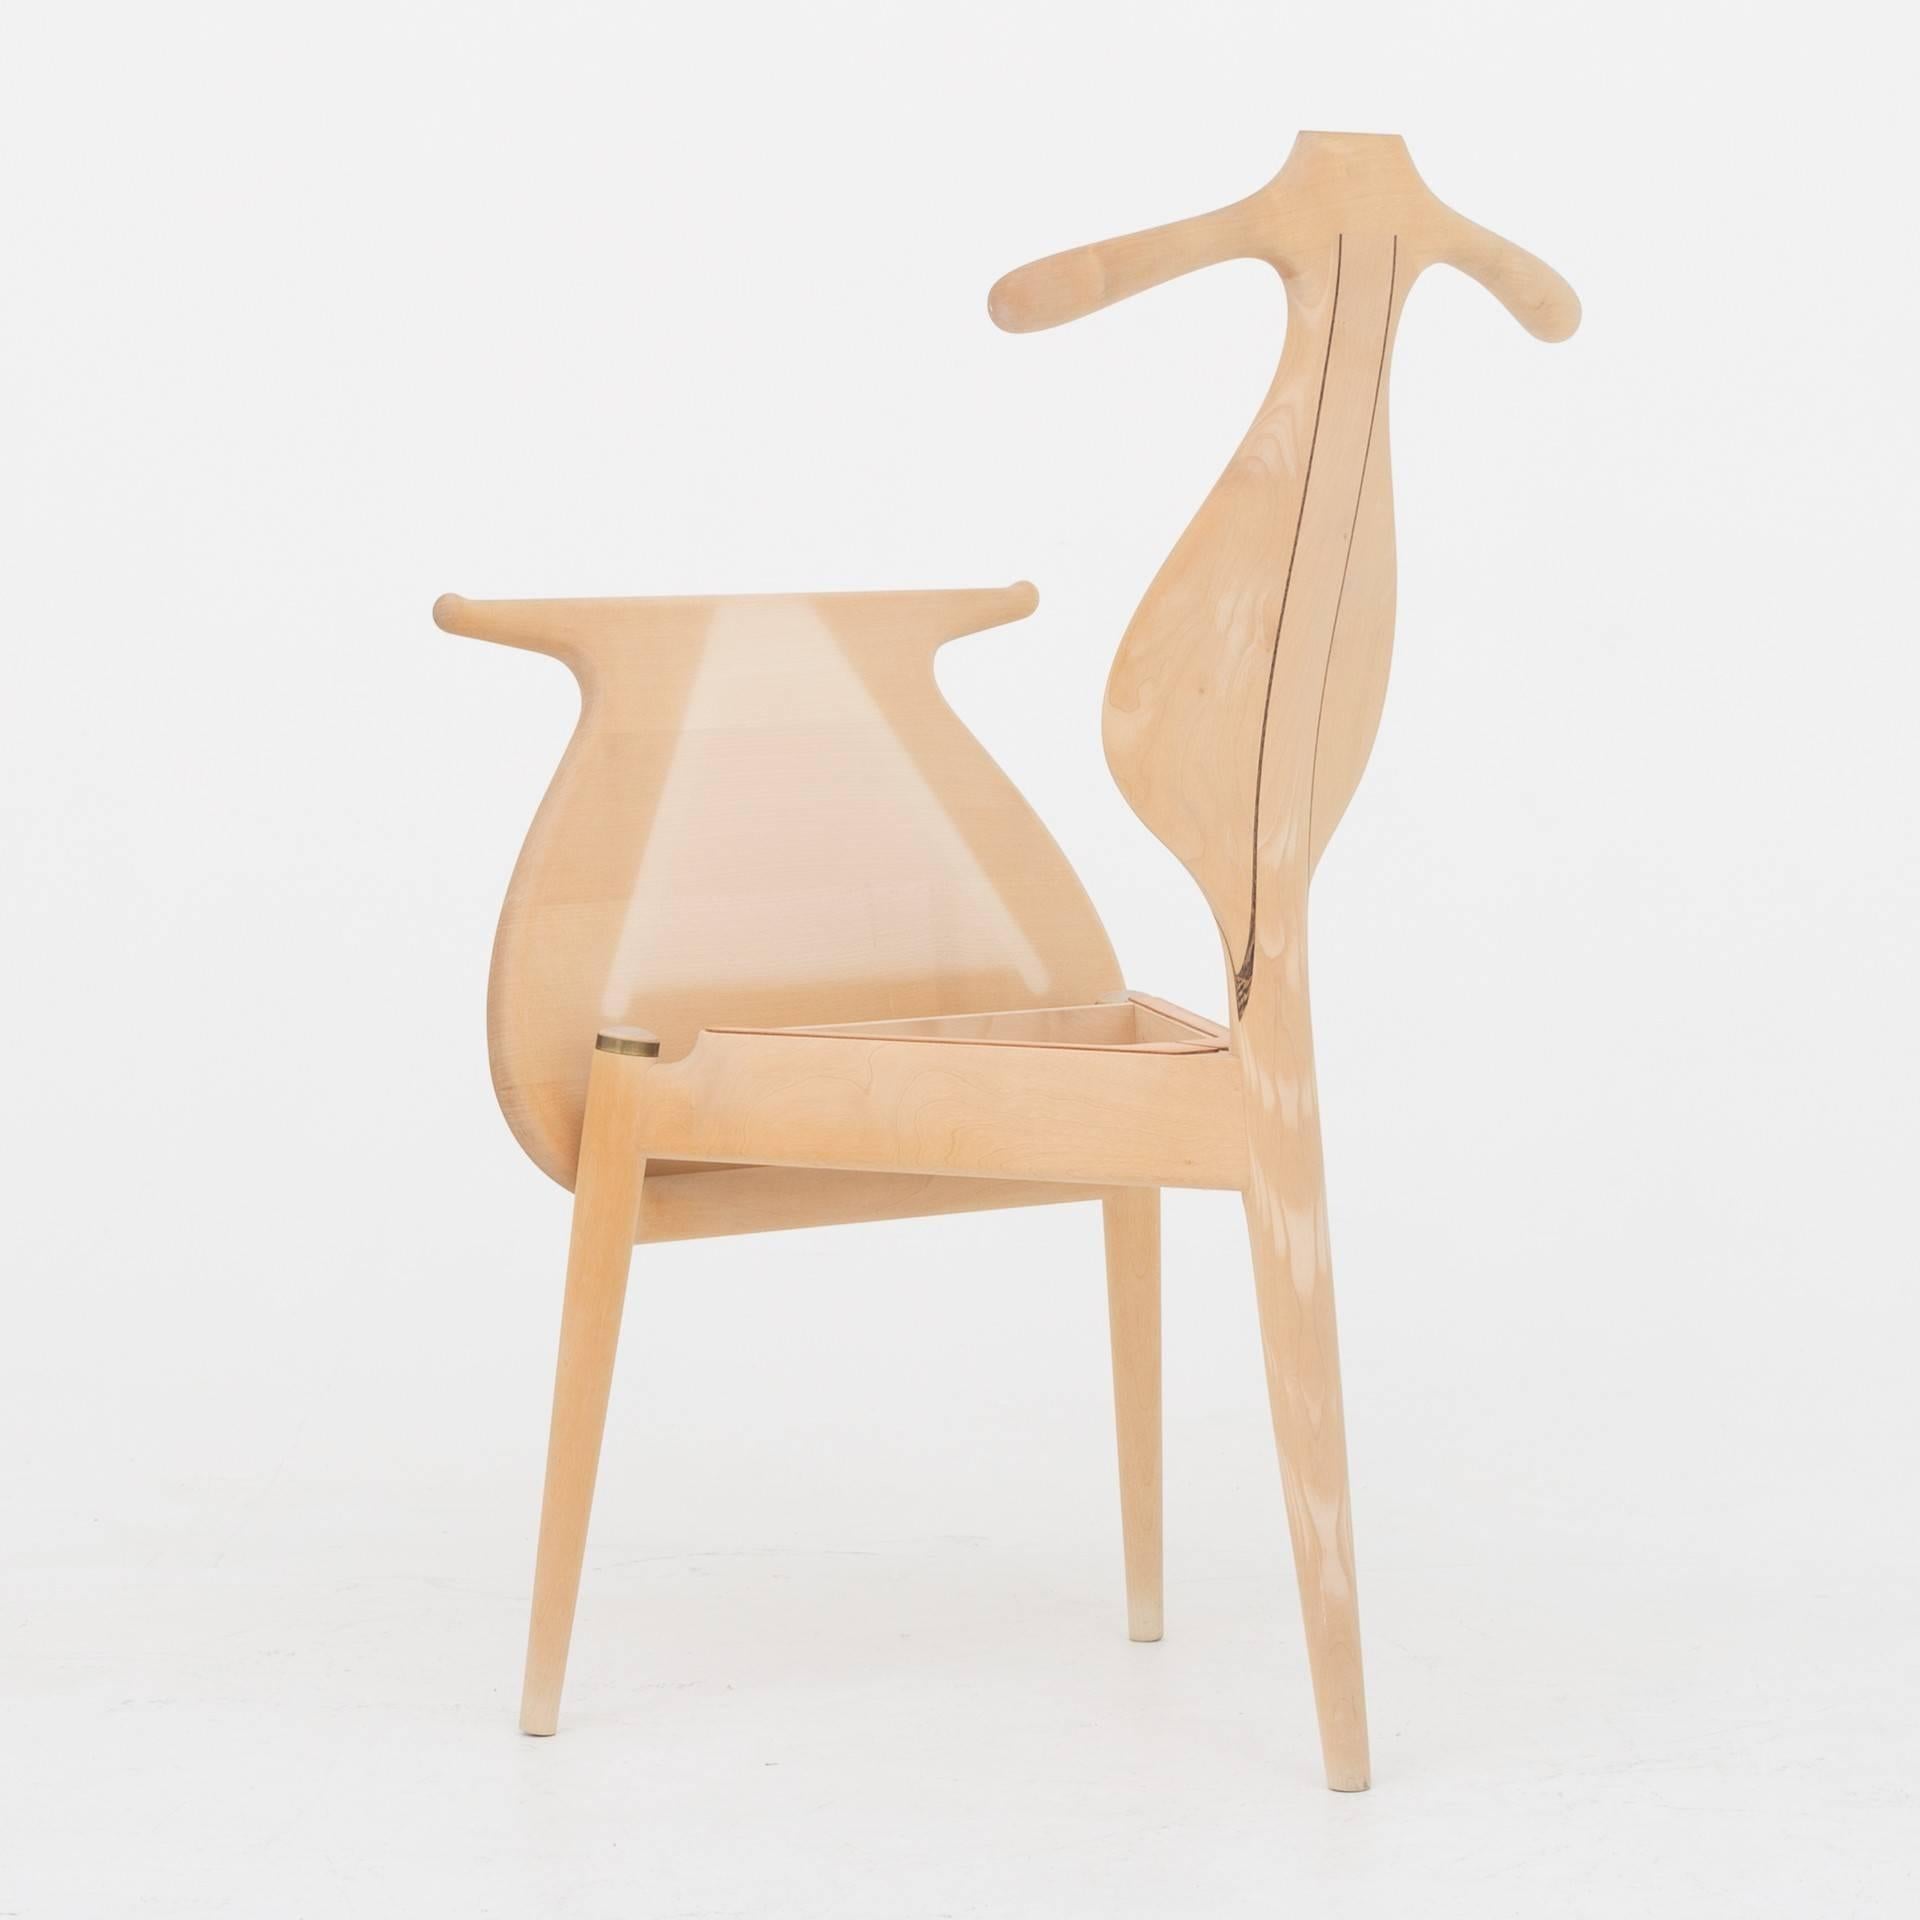 PP 250, The Valet chair in maple. Designed in 1951. Maker PP furniture. More pieces in stock.